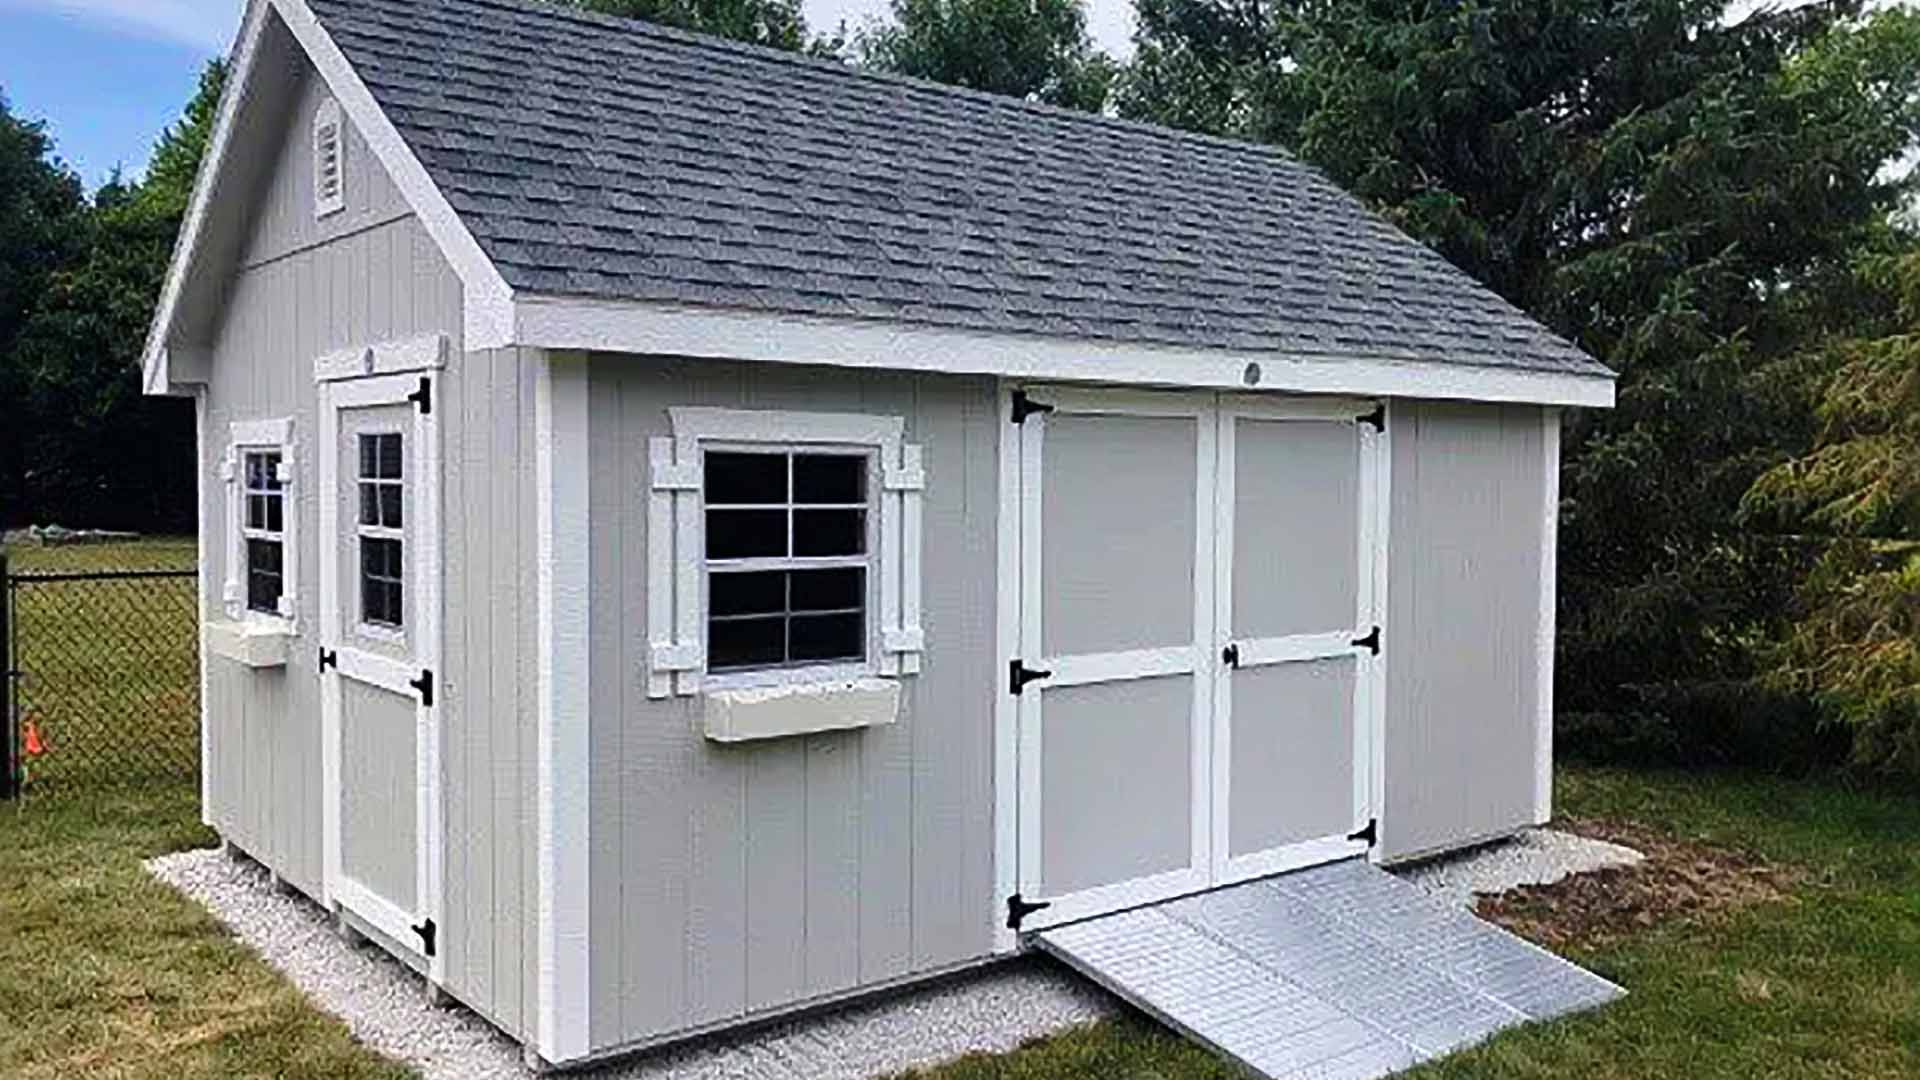 Sun Rise Sheds | Is Financing A Storage Shed Right For You?